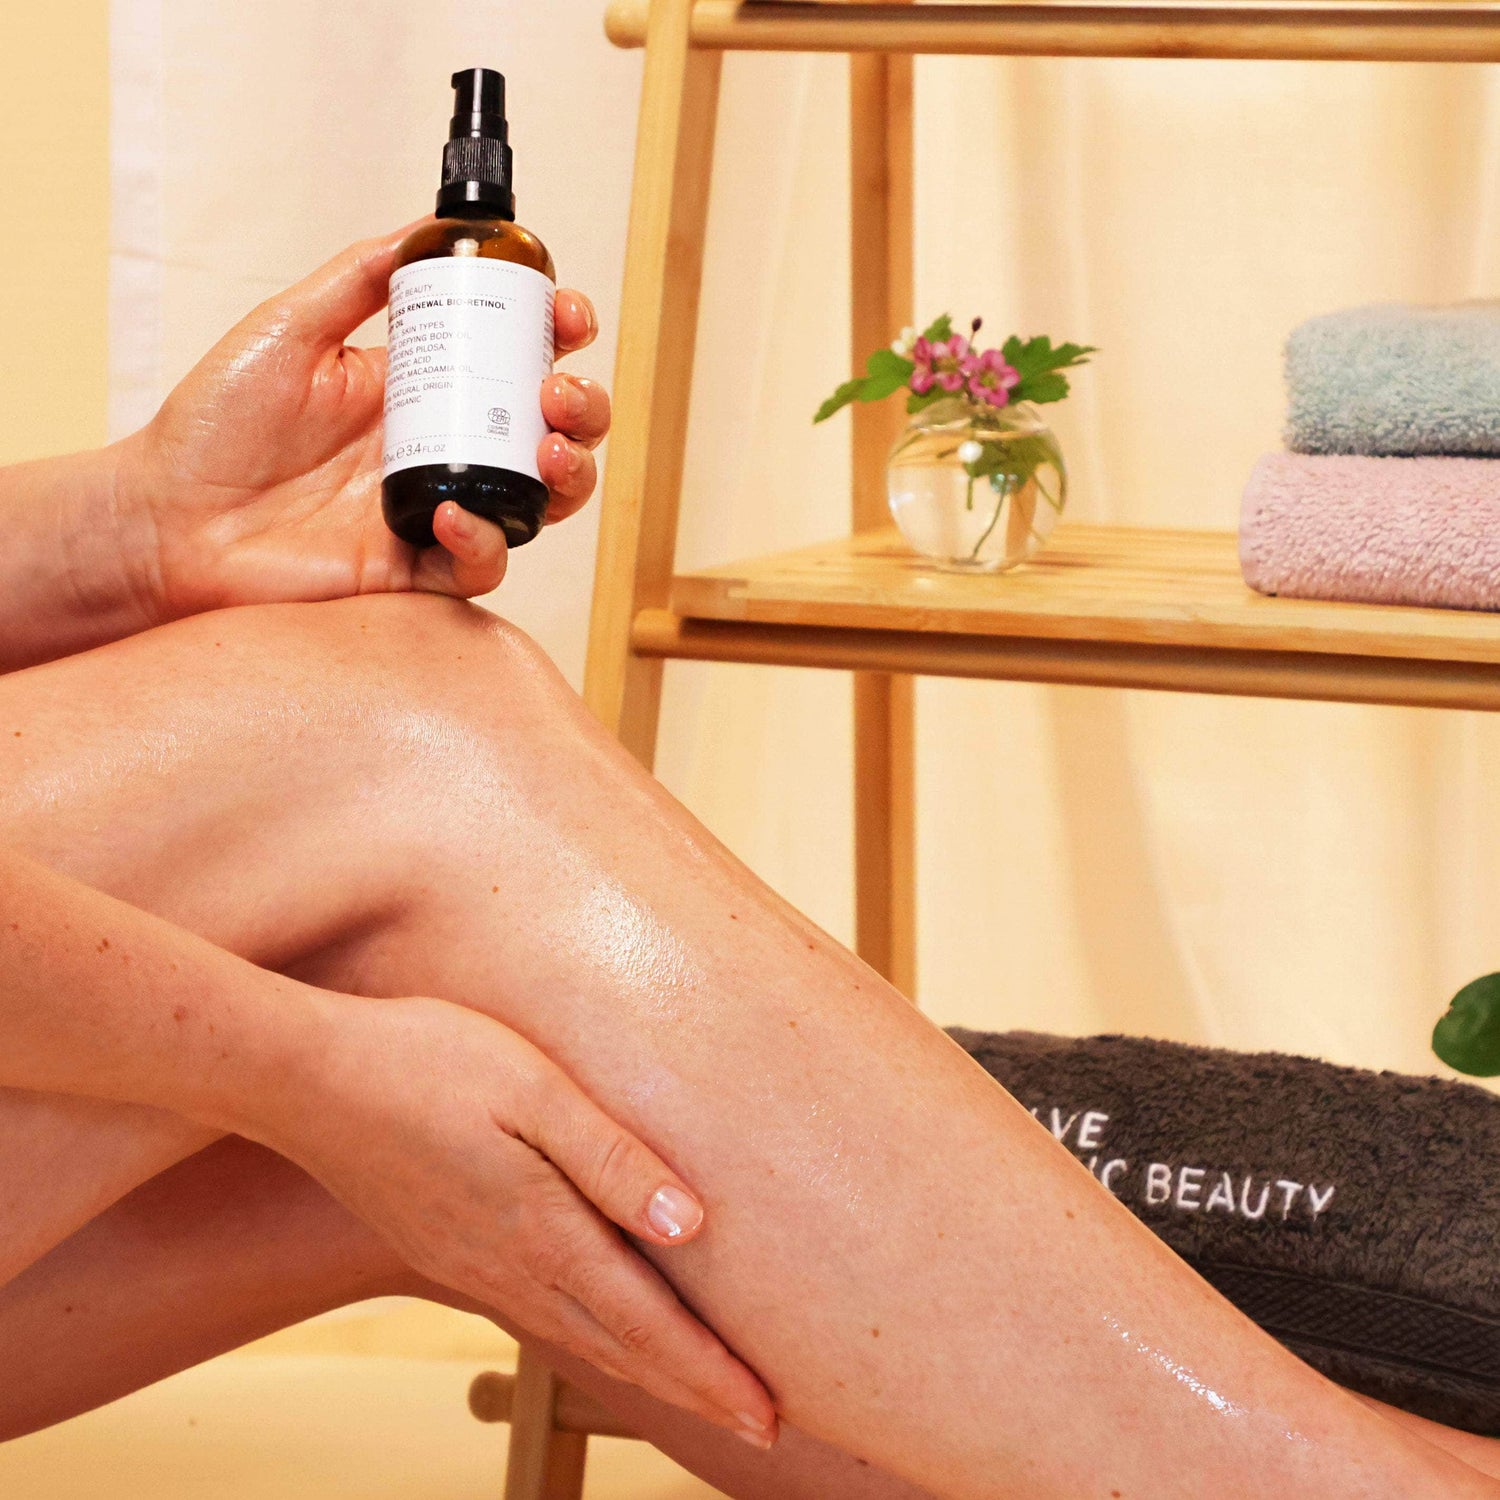 skincare model using firming body oil on leg in front of bathroom shelf with towels and flowers on it